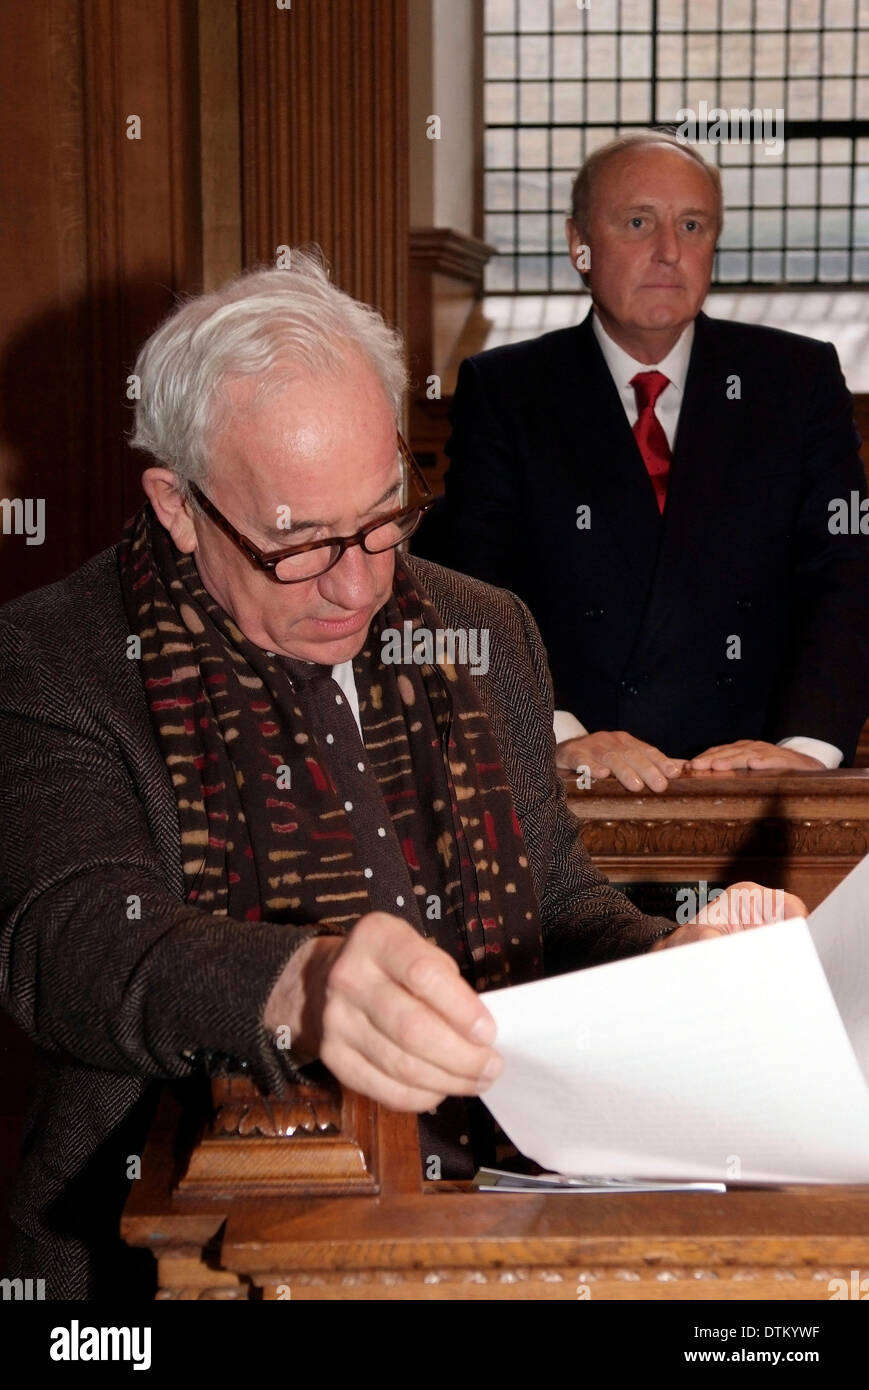 London, UK. 20th February 2014. Actor Simon Callow read Dickens at a service to mark the 150th Anniversary of the Journalists' Charity at St Bride's Fleet `Street (the journalist's church). Charles Dickens was one of the charity's founders, and Callow is an acknowledged expert on the Victorian author. In background Paul Dacre, editor-in-chief Daily Mail Stock Photo